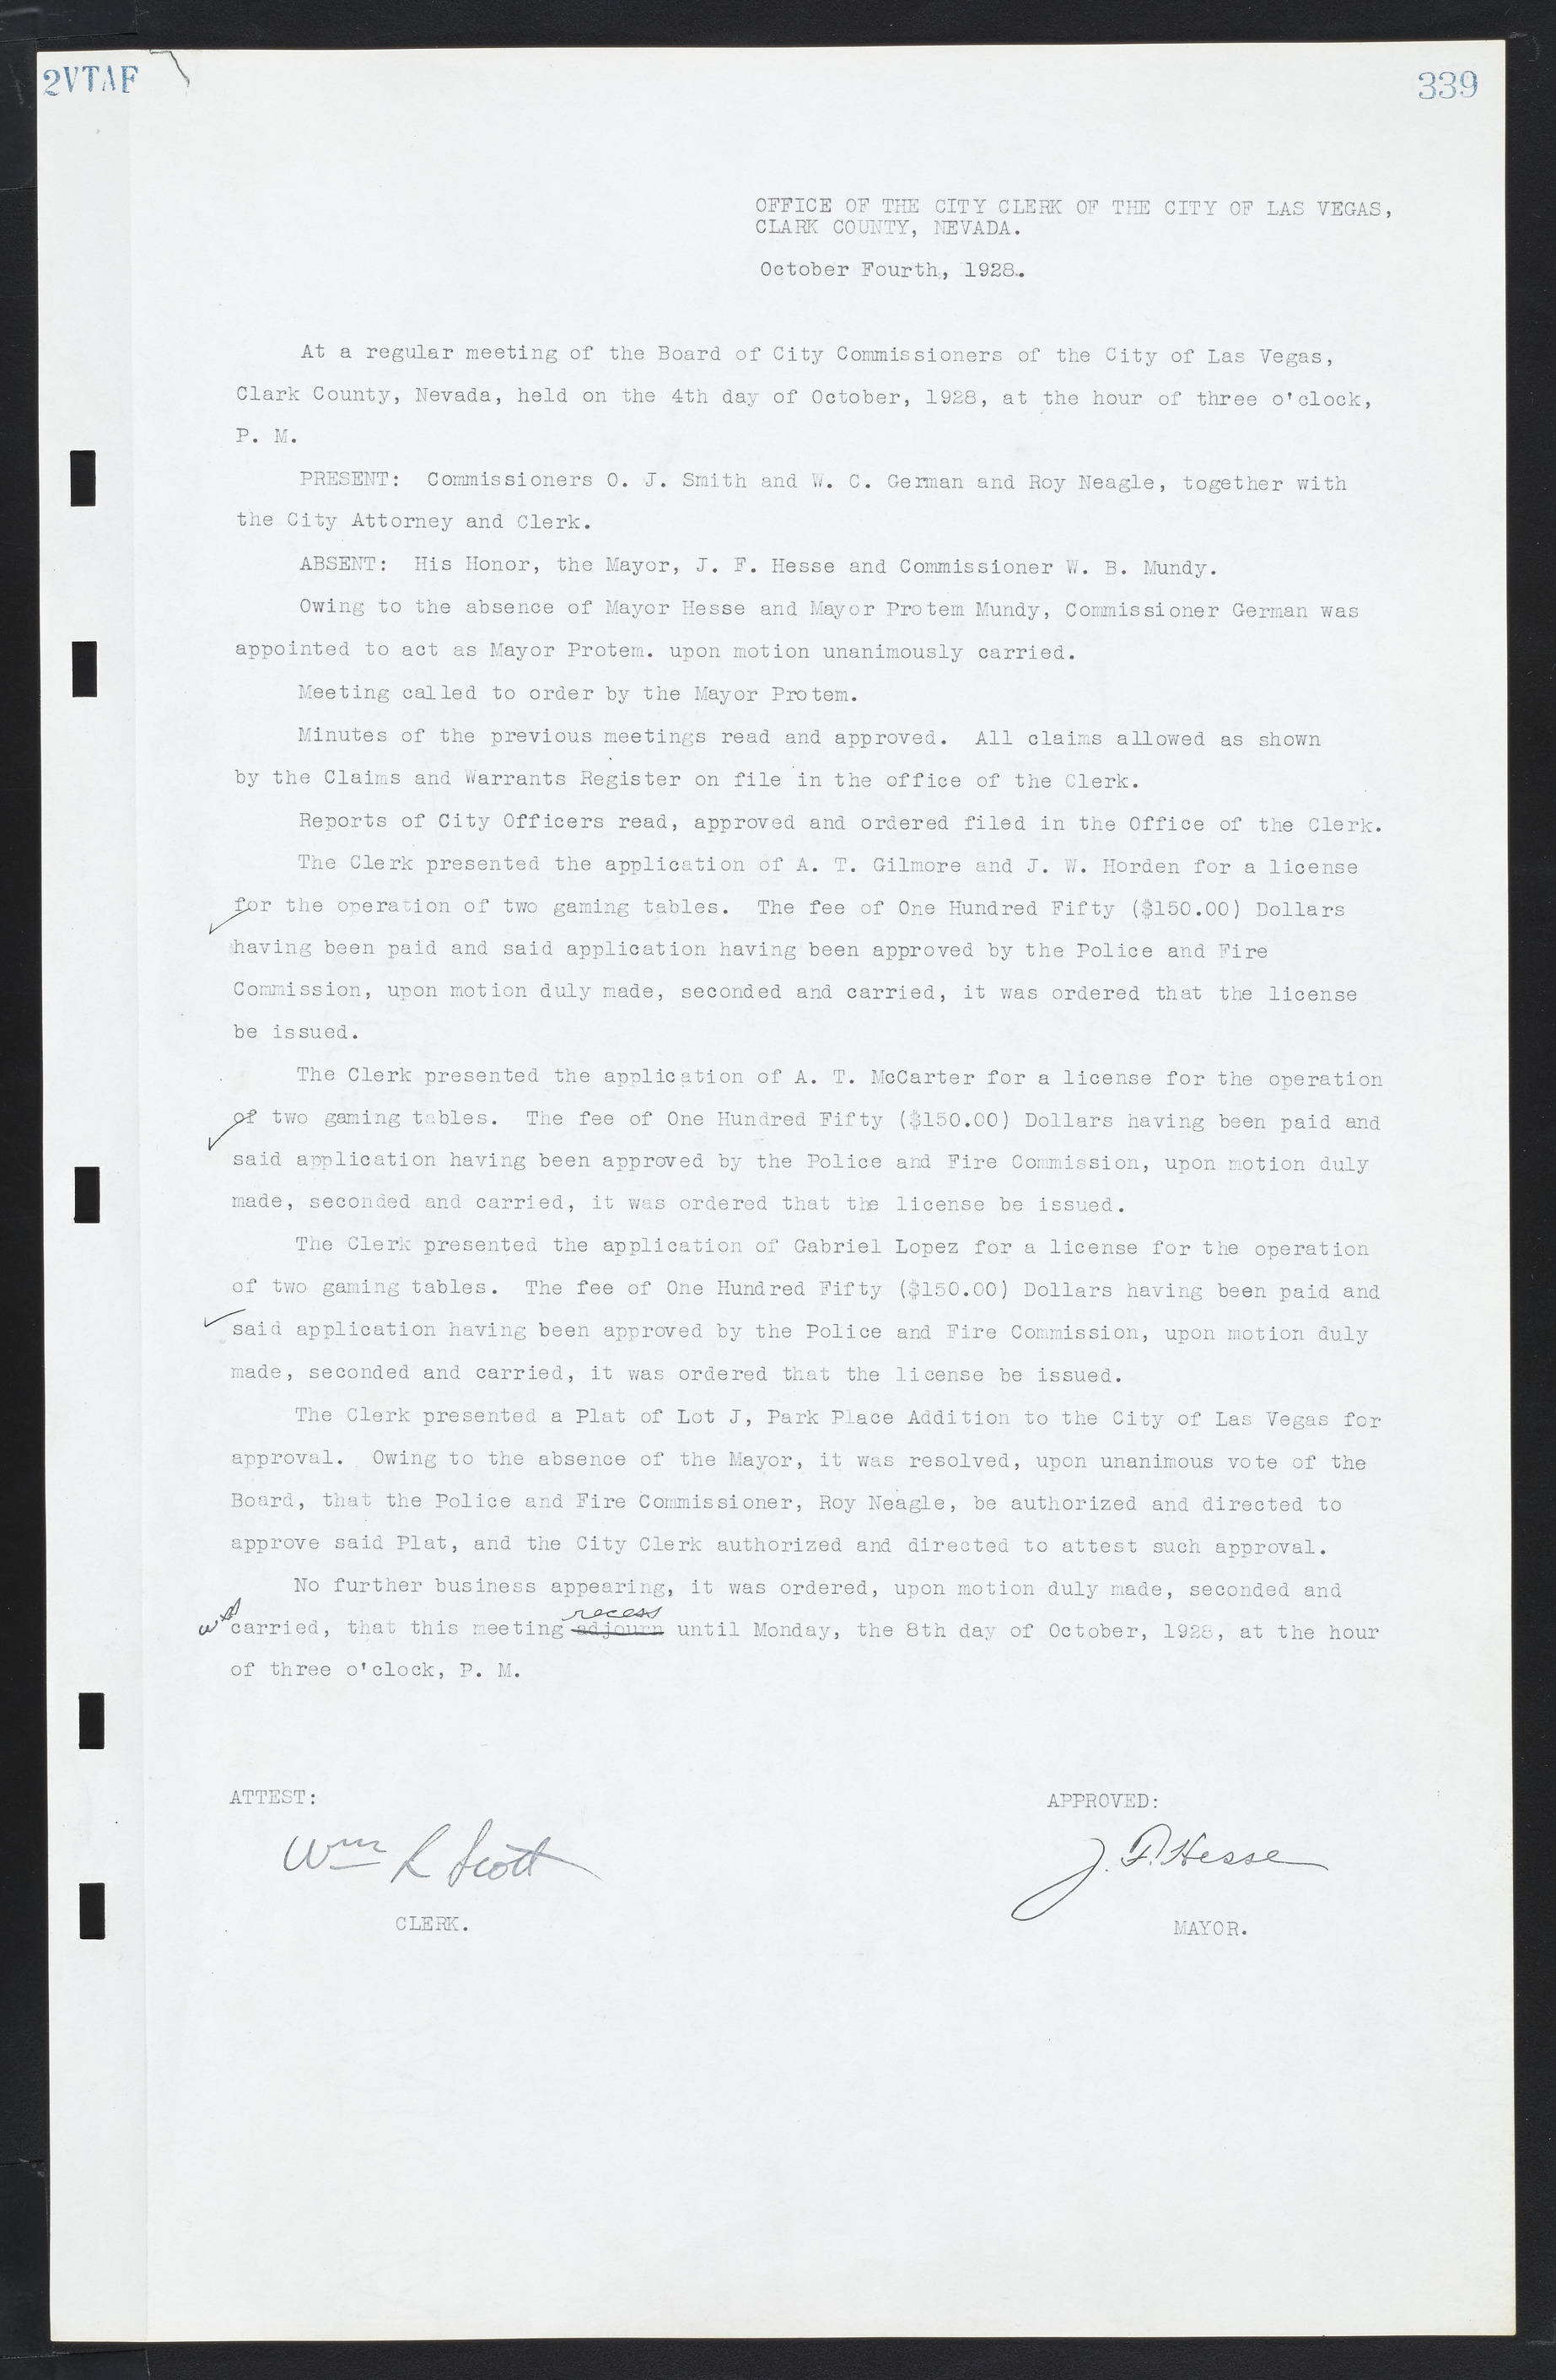 Las Vegas City Commission Minutes, March 1, 1922 to May 10, 1929, lvc000002-348